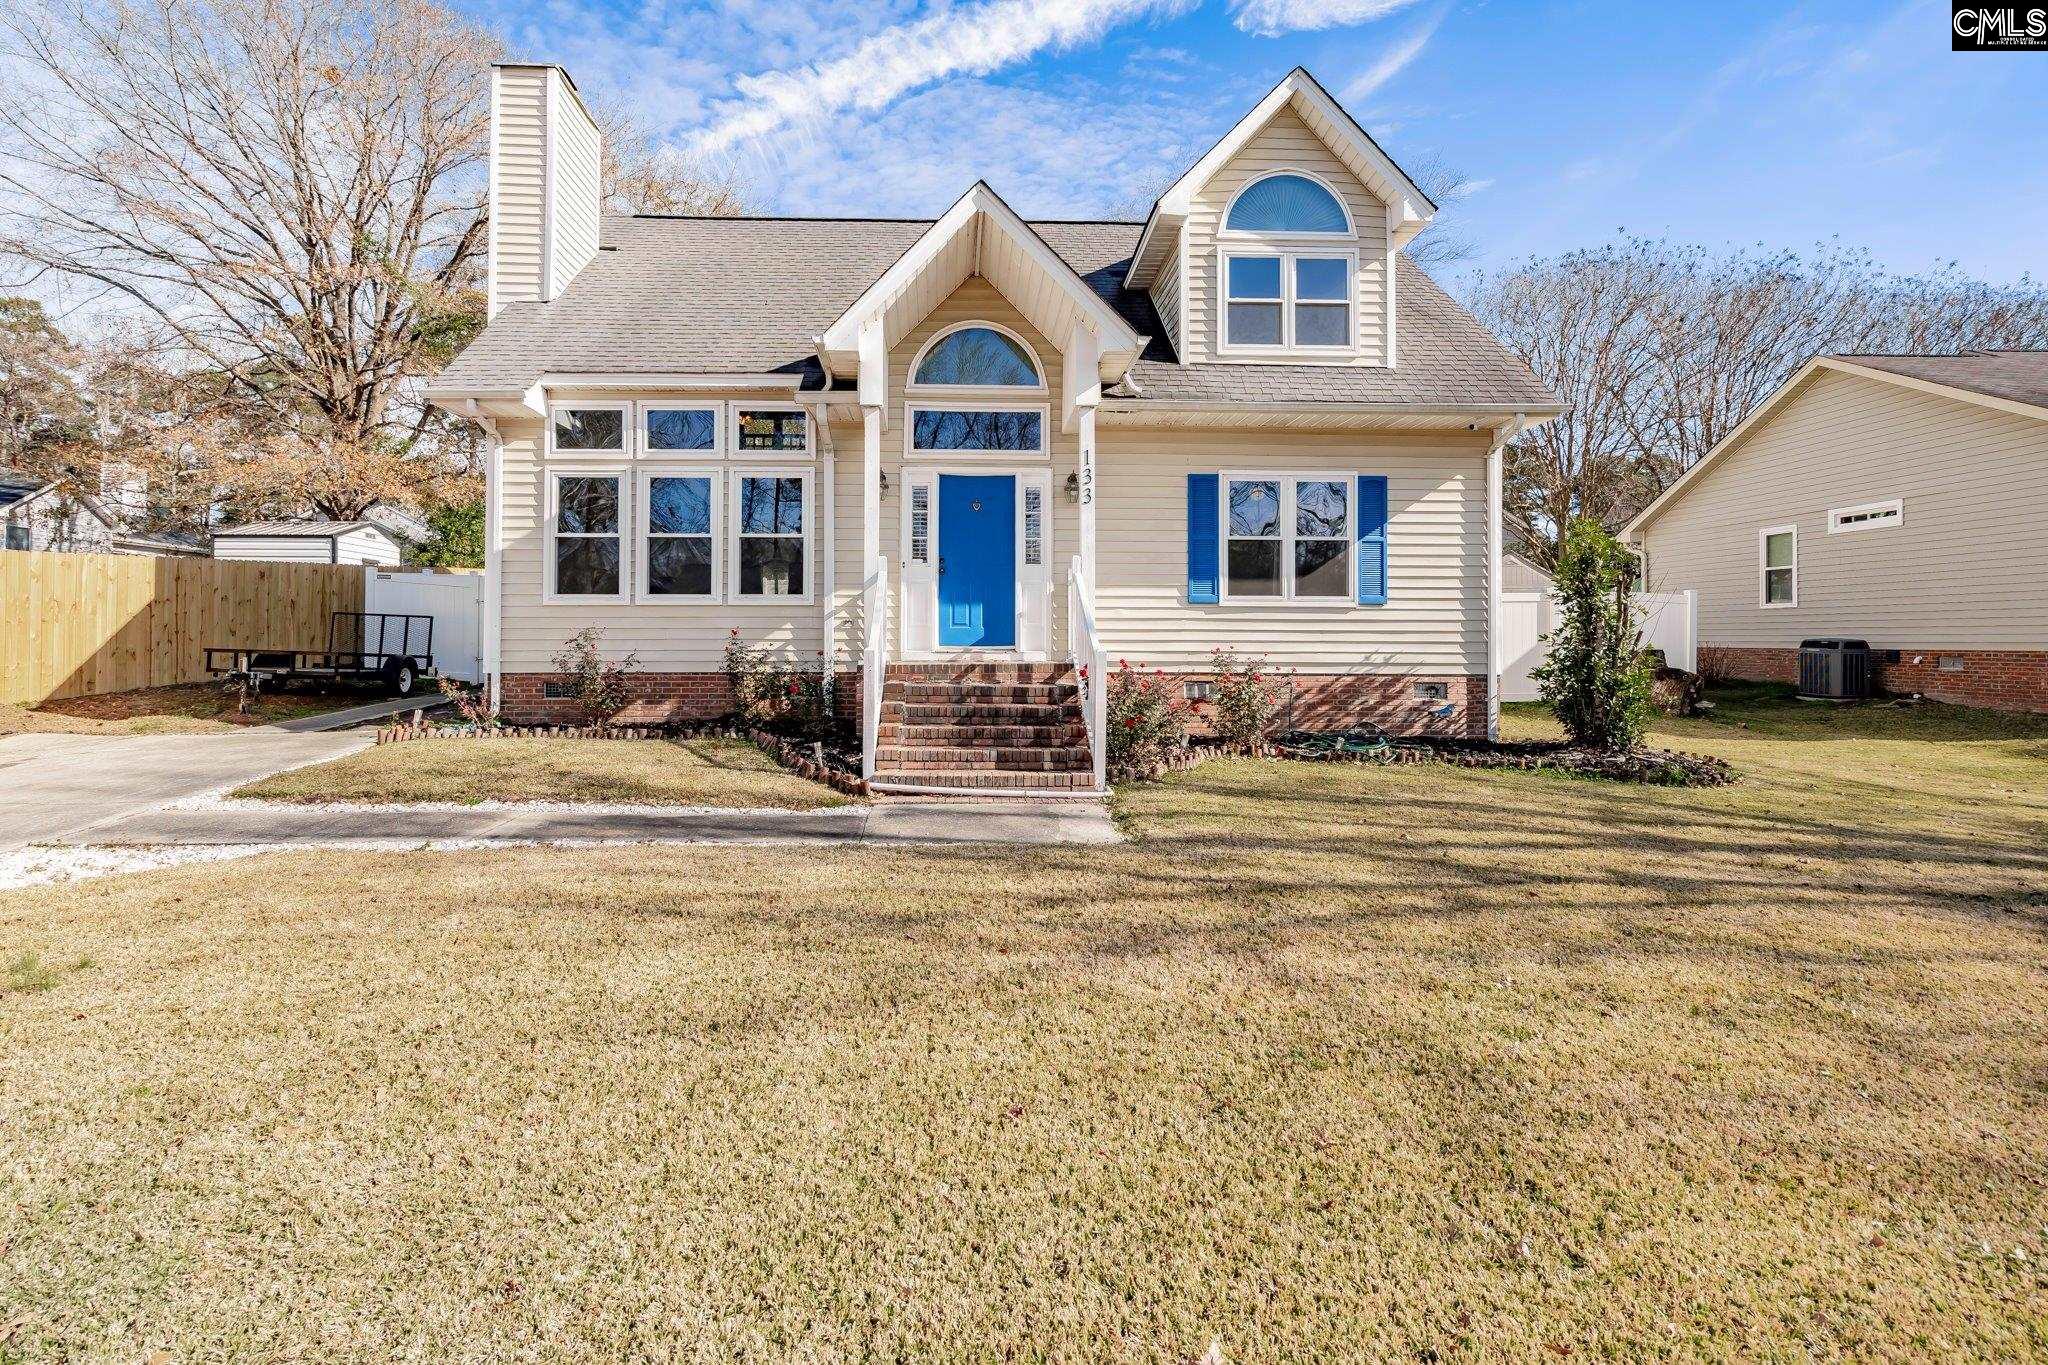 133 Darby Way West Columbia, SC 29170